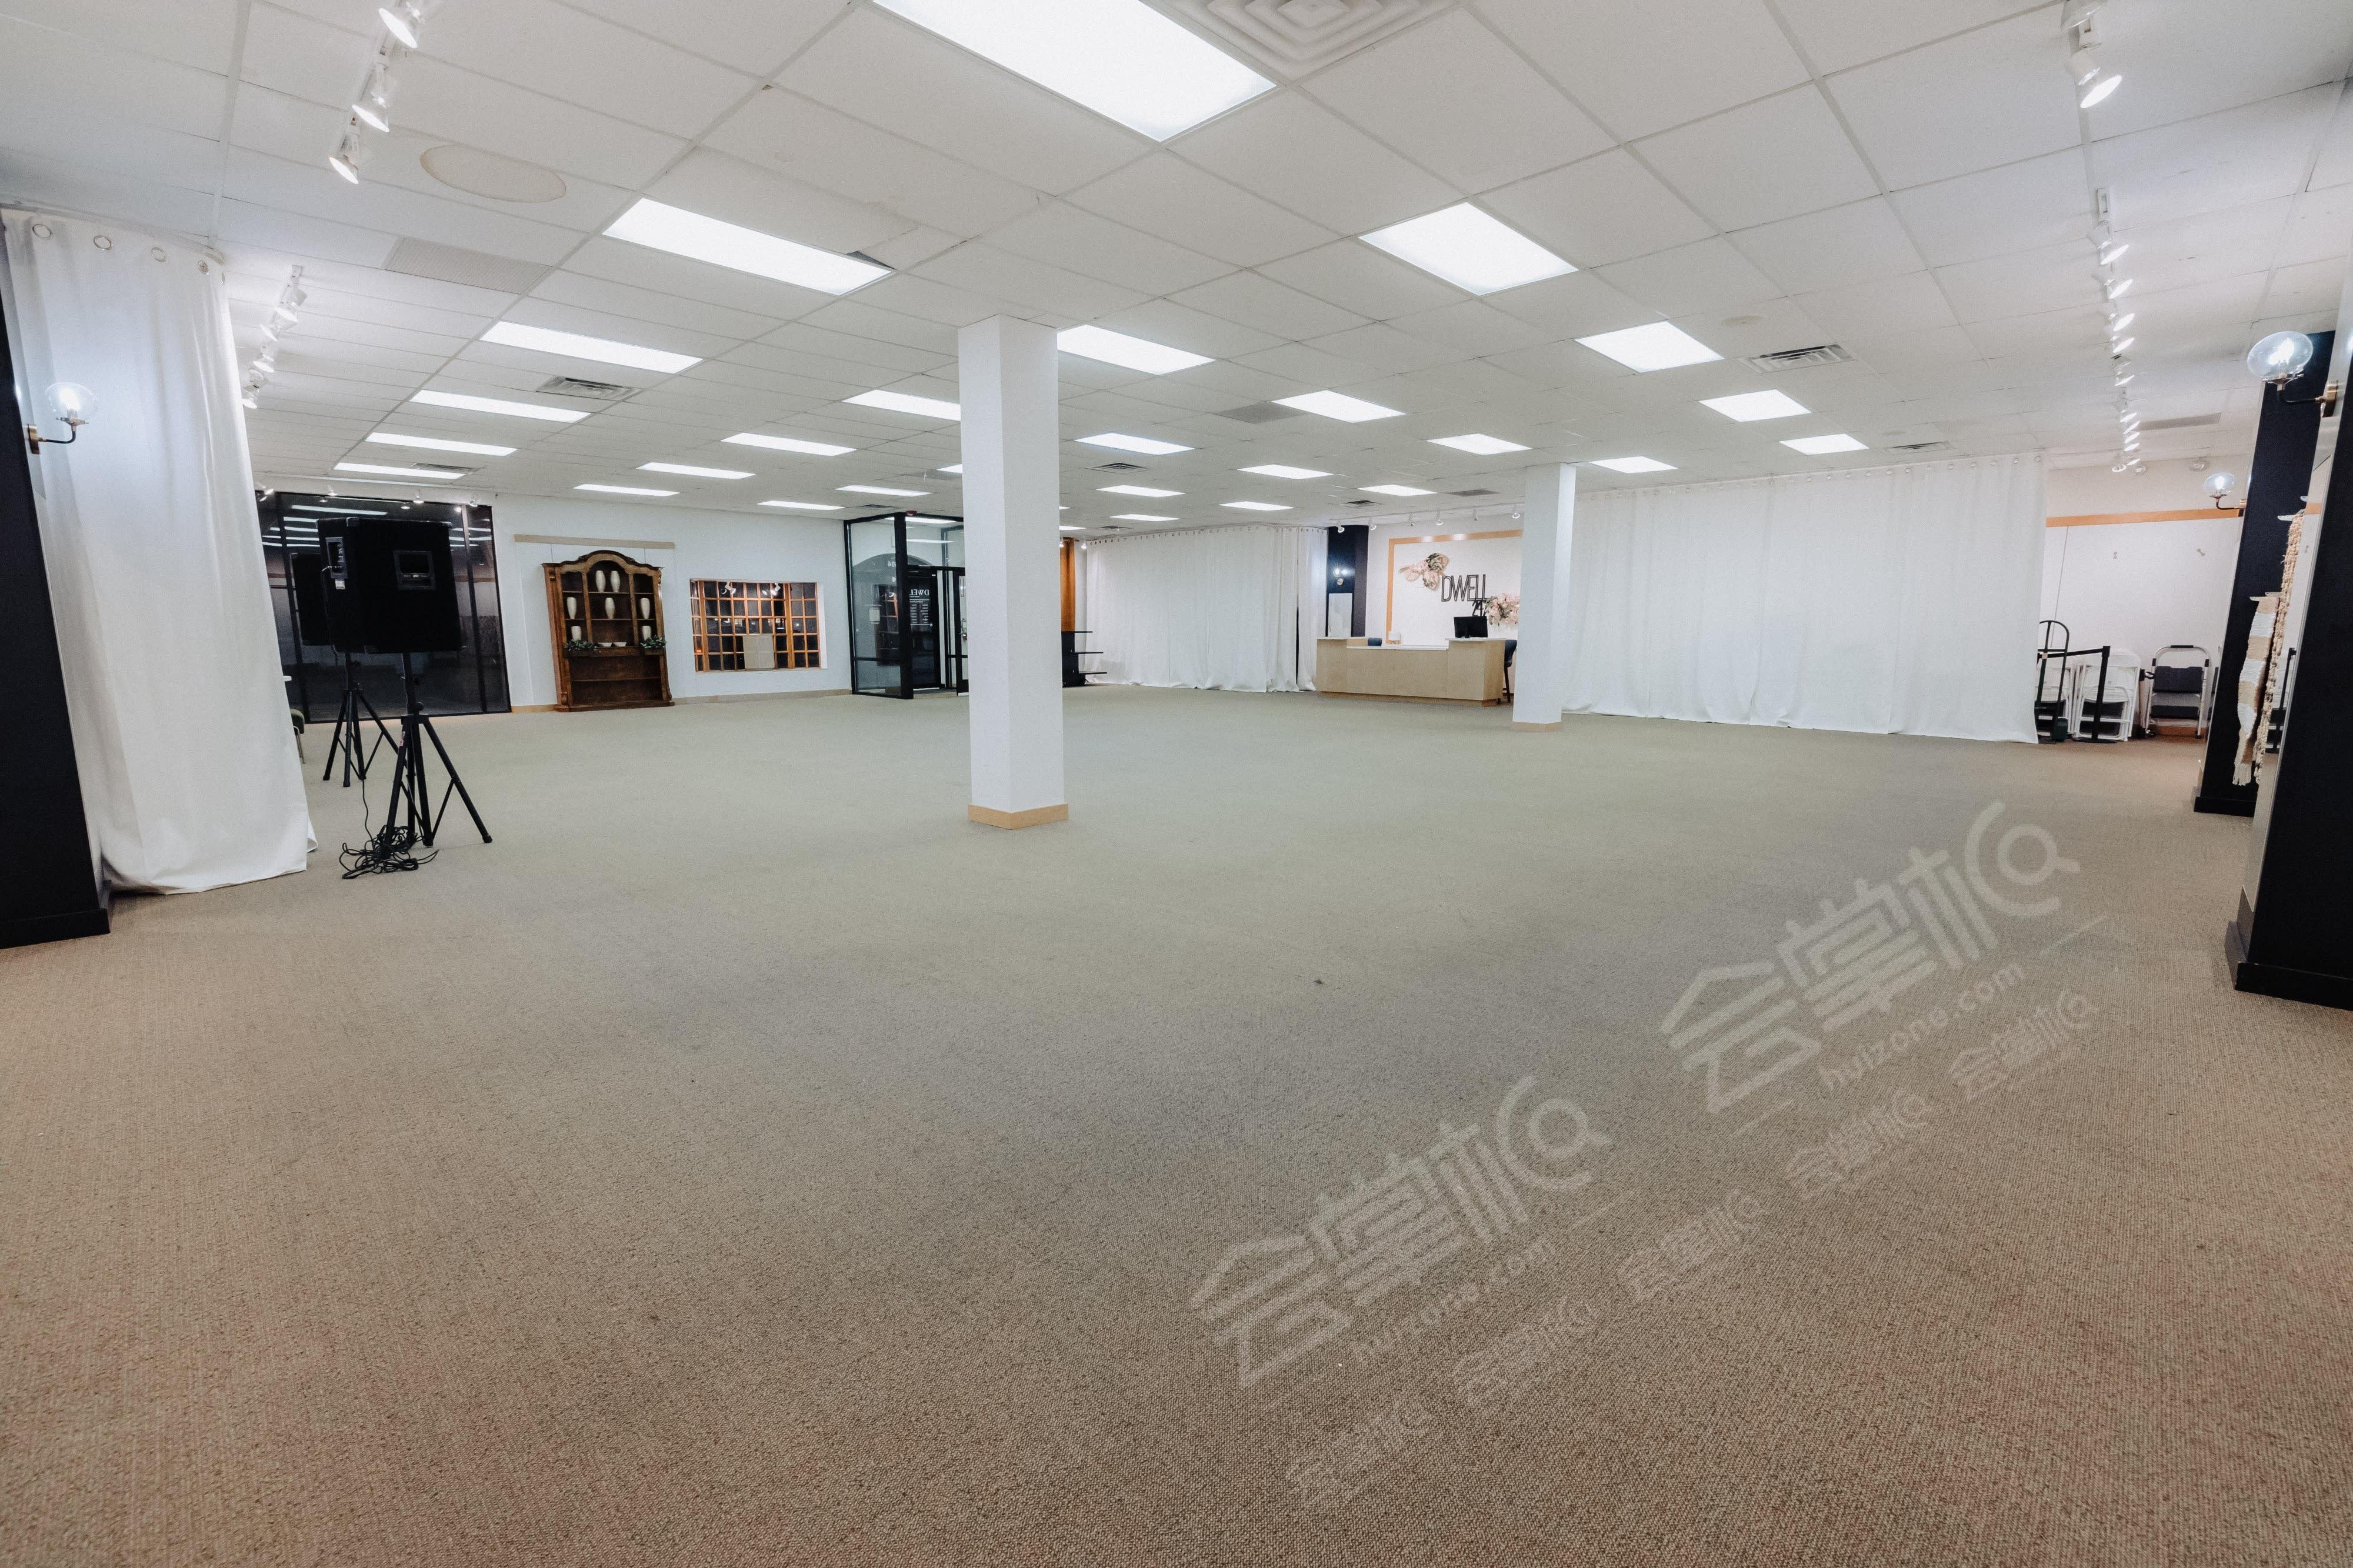 Modern, Open Concept Event Space in the heart of Arlington Entertainment District